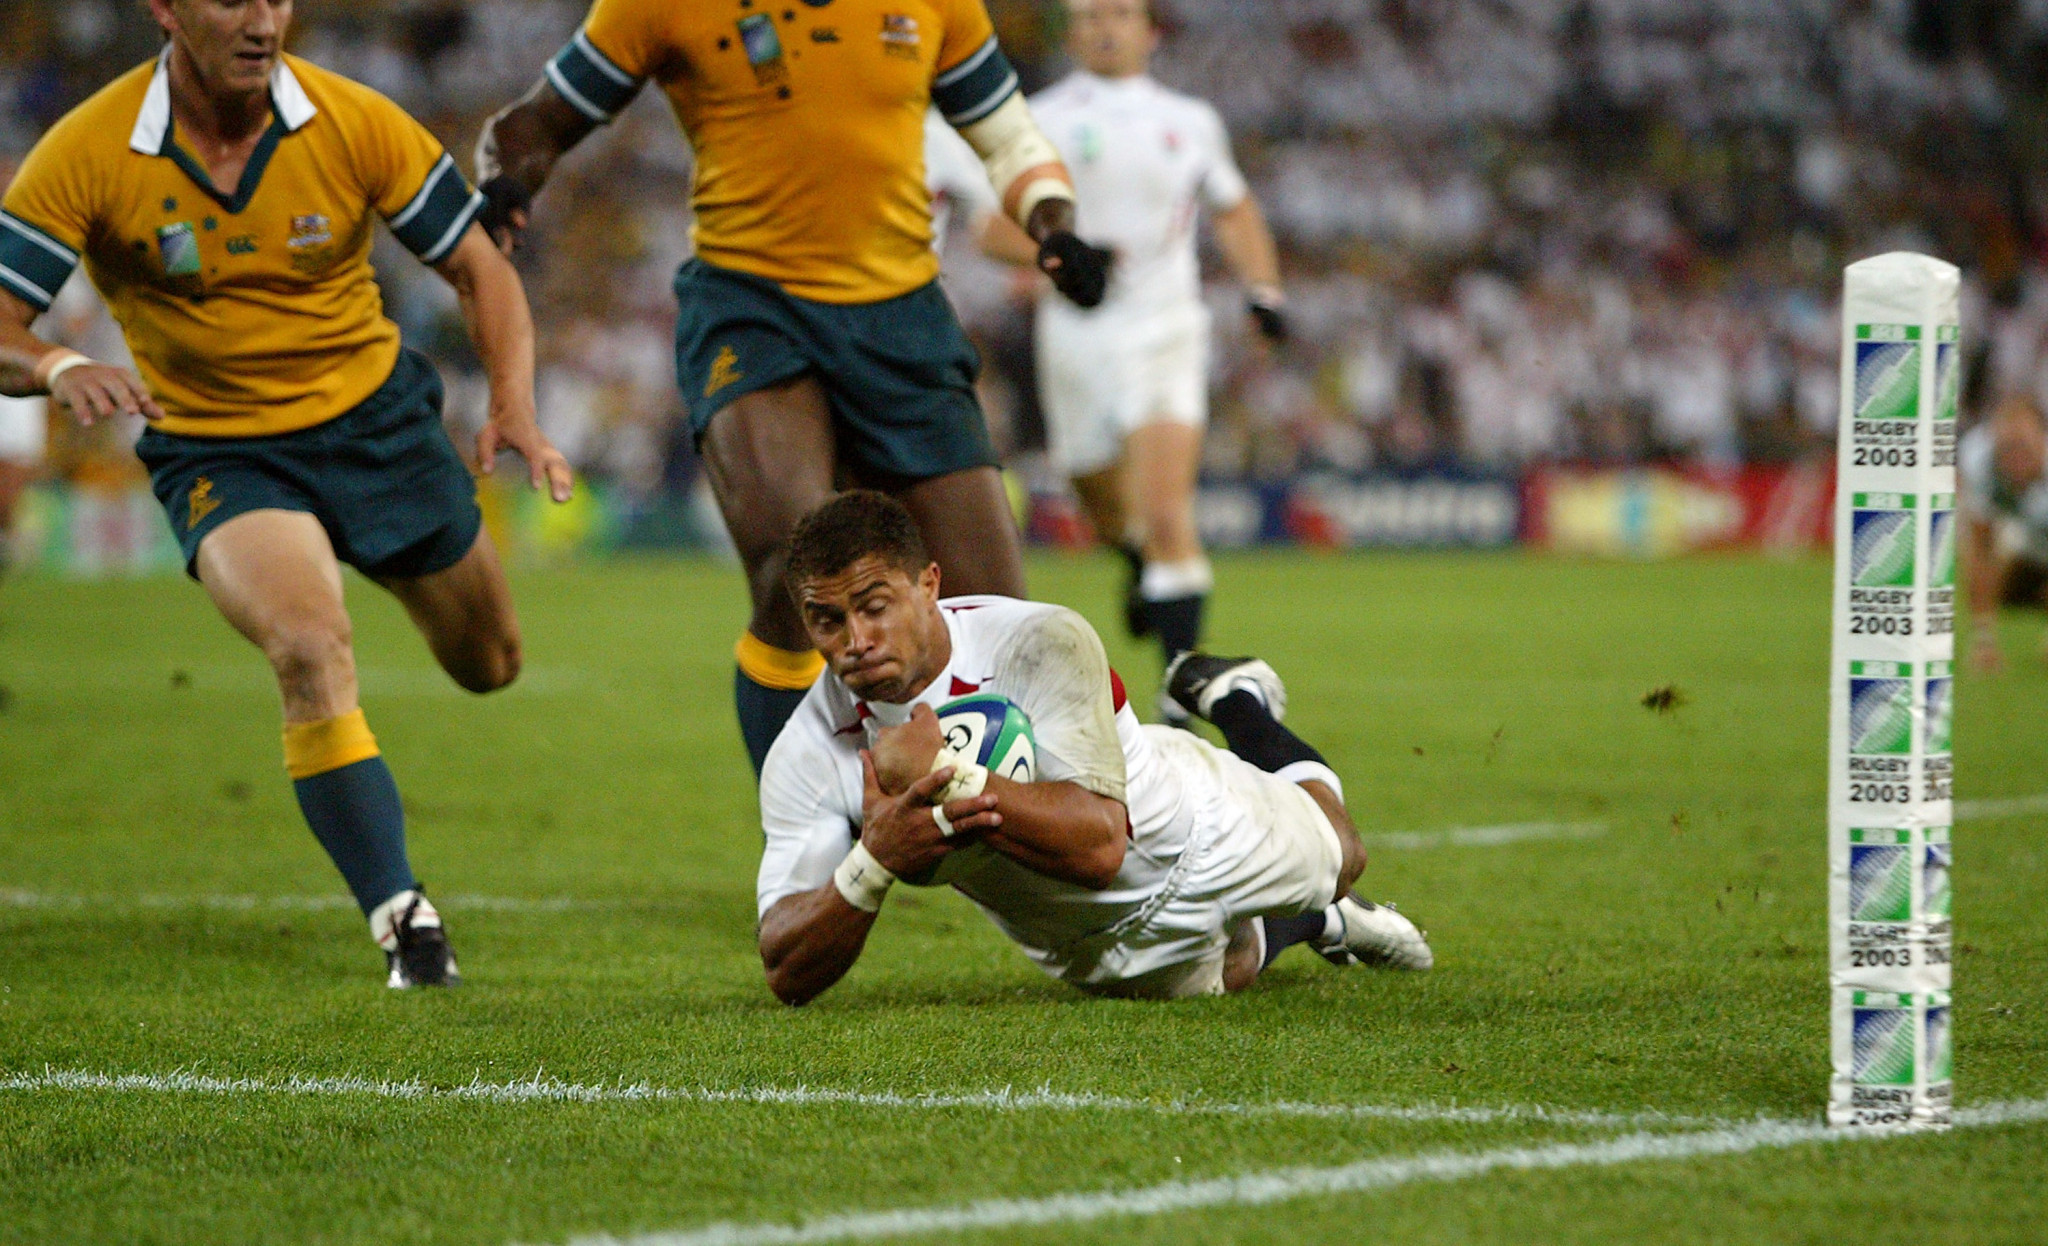 Jason Robinson was the scorer of the only try for England on the way to victory in the 2003 Rugby Union World Cup final ©Getty Images